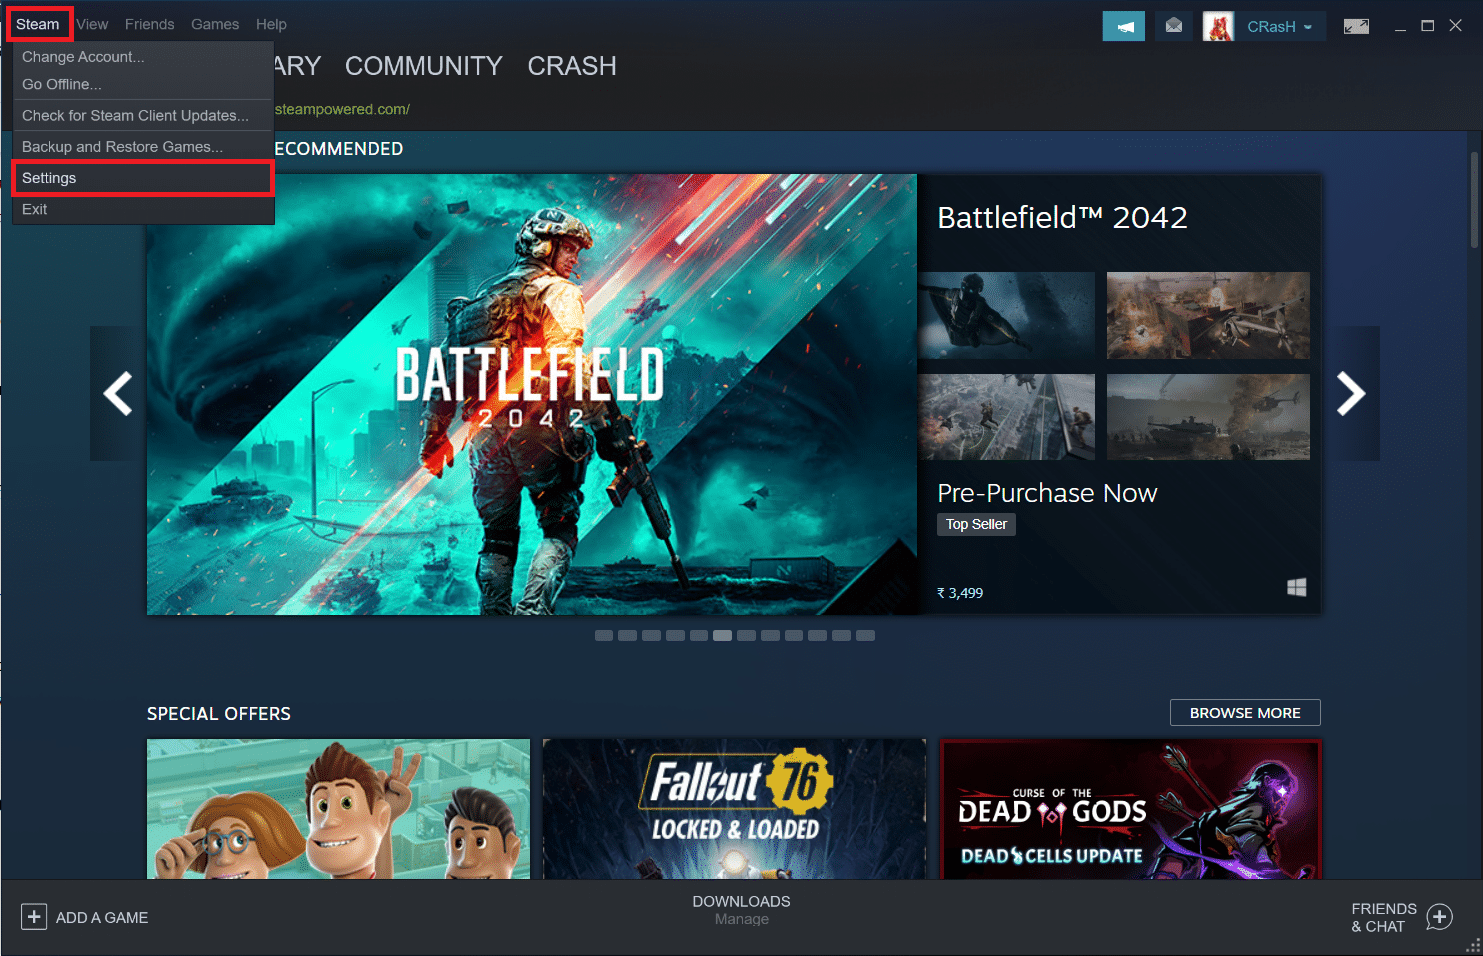 Open Steam and click on “Steam" in the top left corner.
Select “Settings" from the dropdown menu.